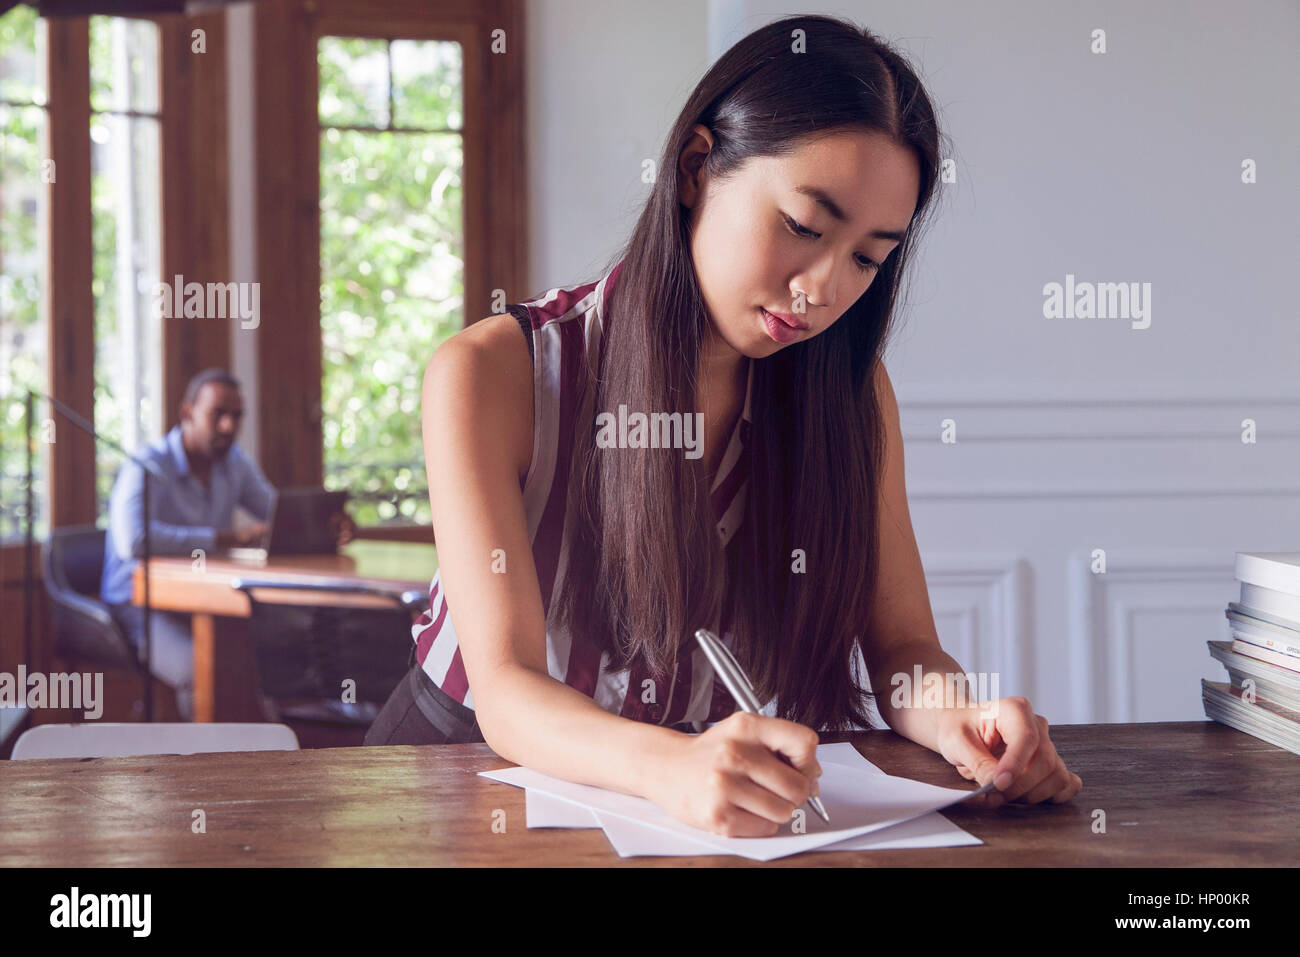 Young woman writing on paper while man watches her in the background Stock Photo